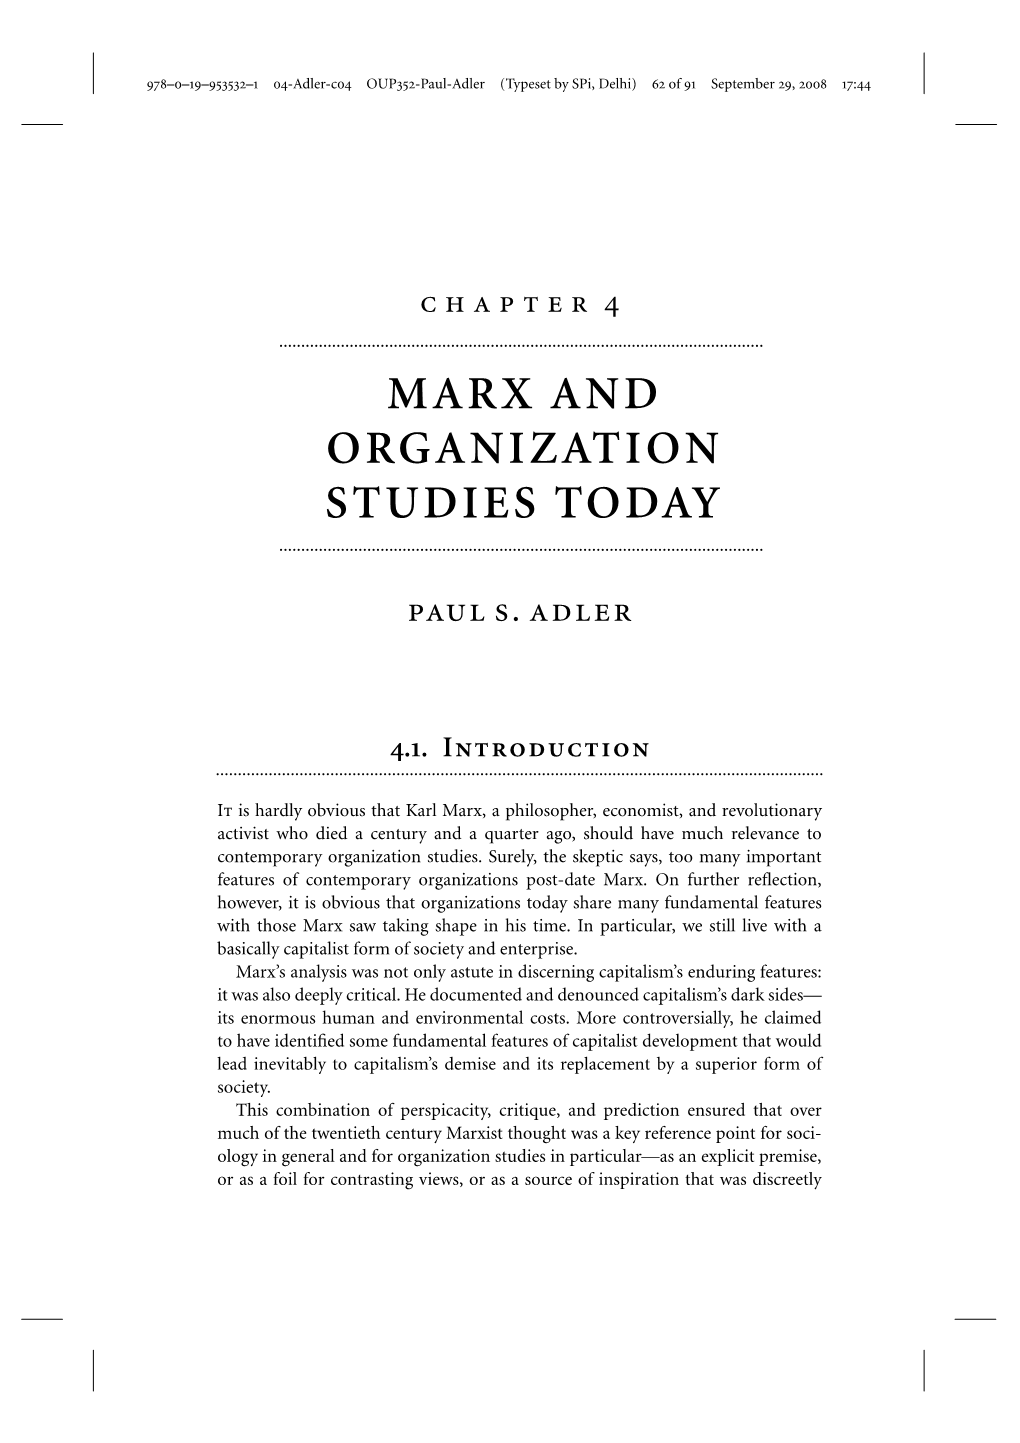 Marx and Organization Studies Today